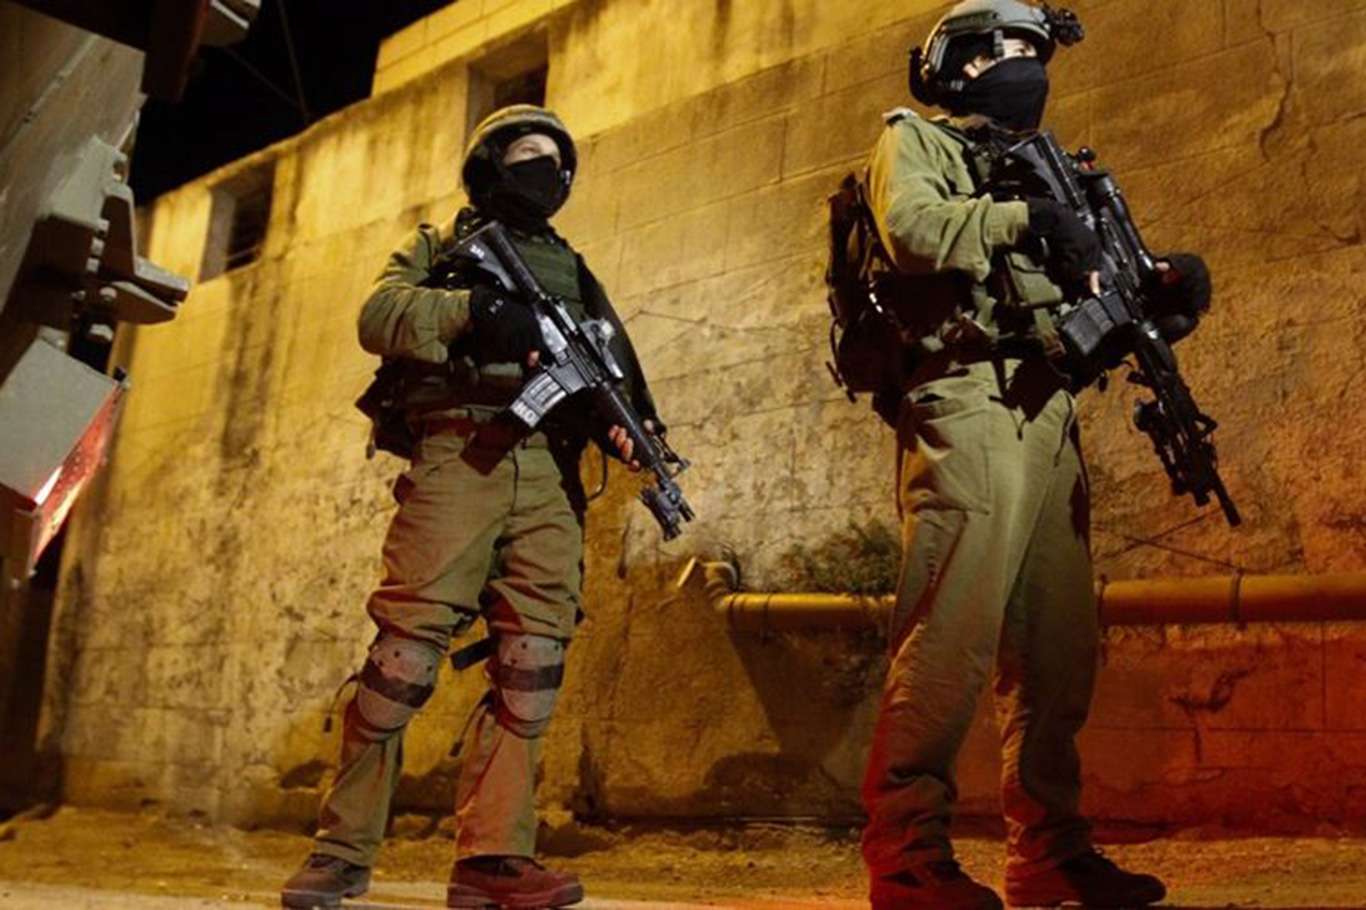 Israeli occupation forces IOF kidnapped five Palestinians after breaking into their homes in the occupied West Bank and Jerusalem